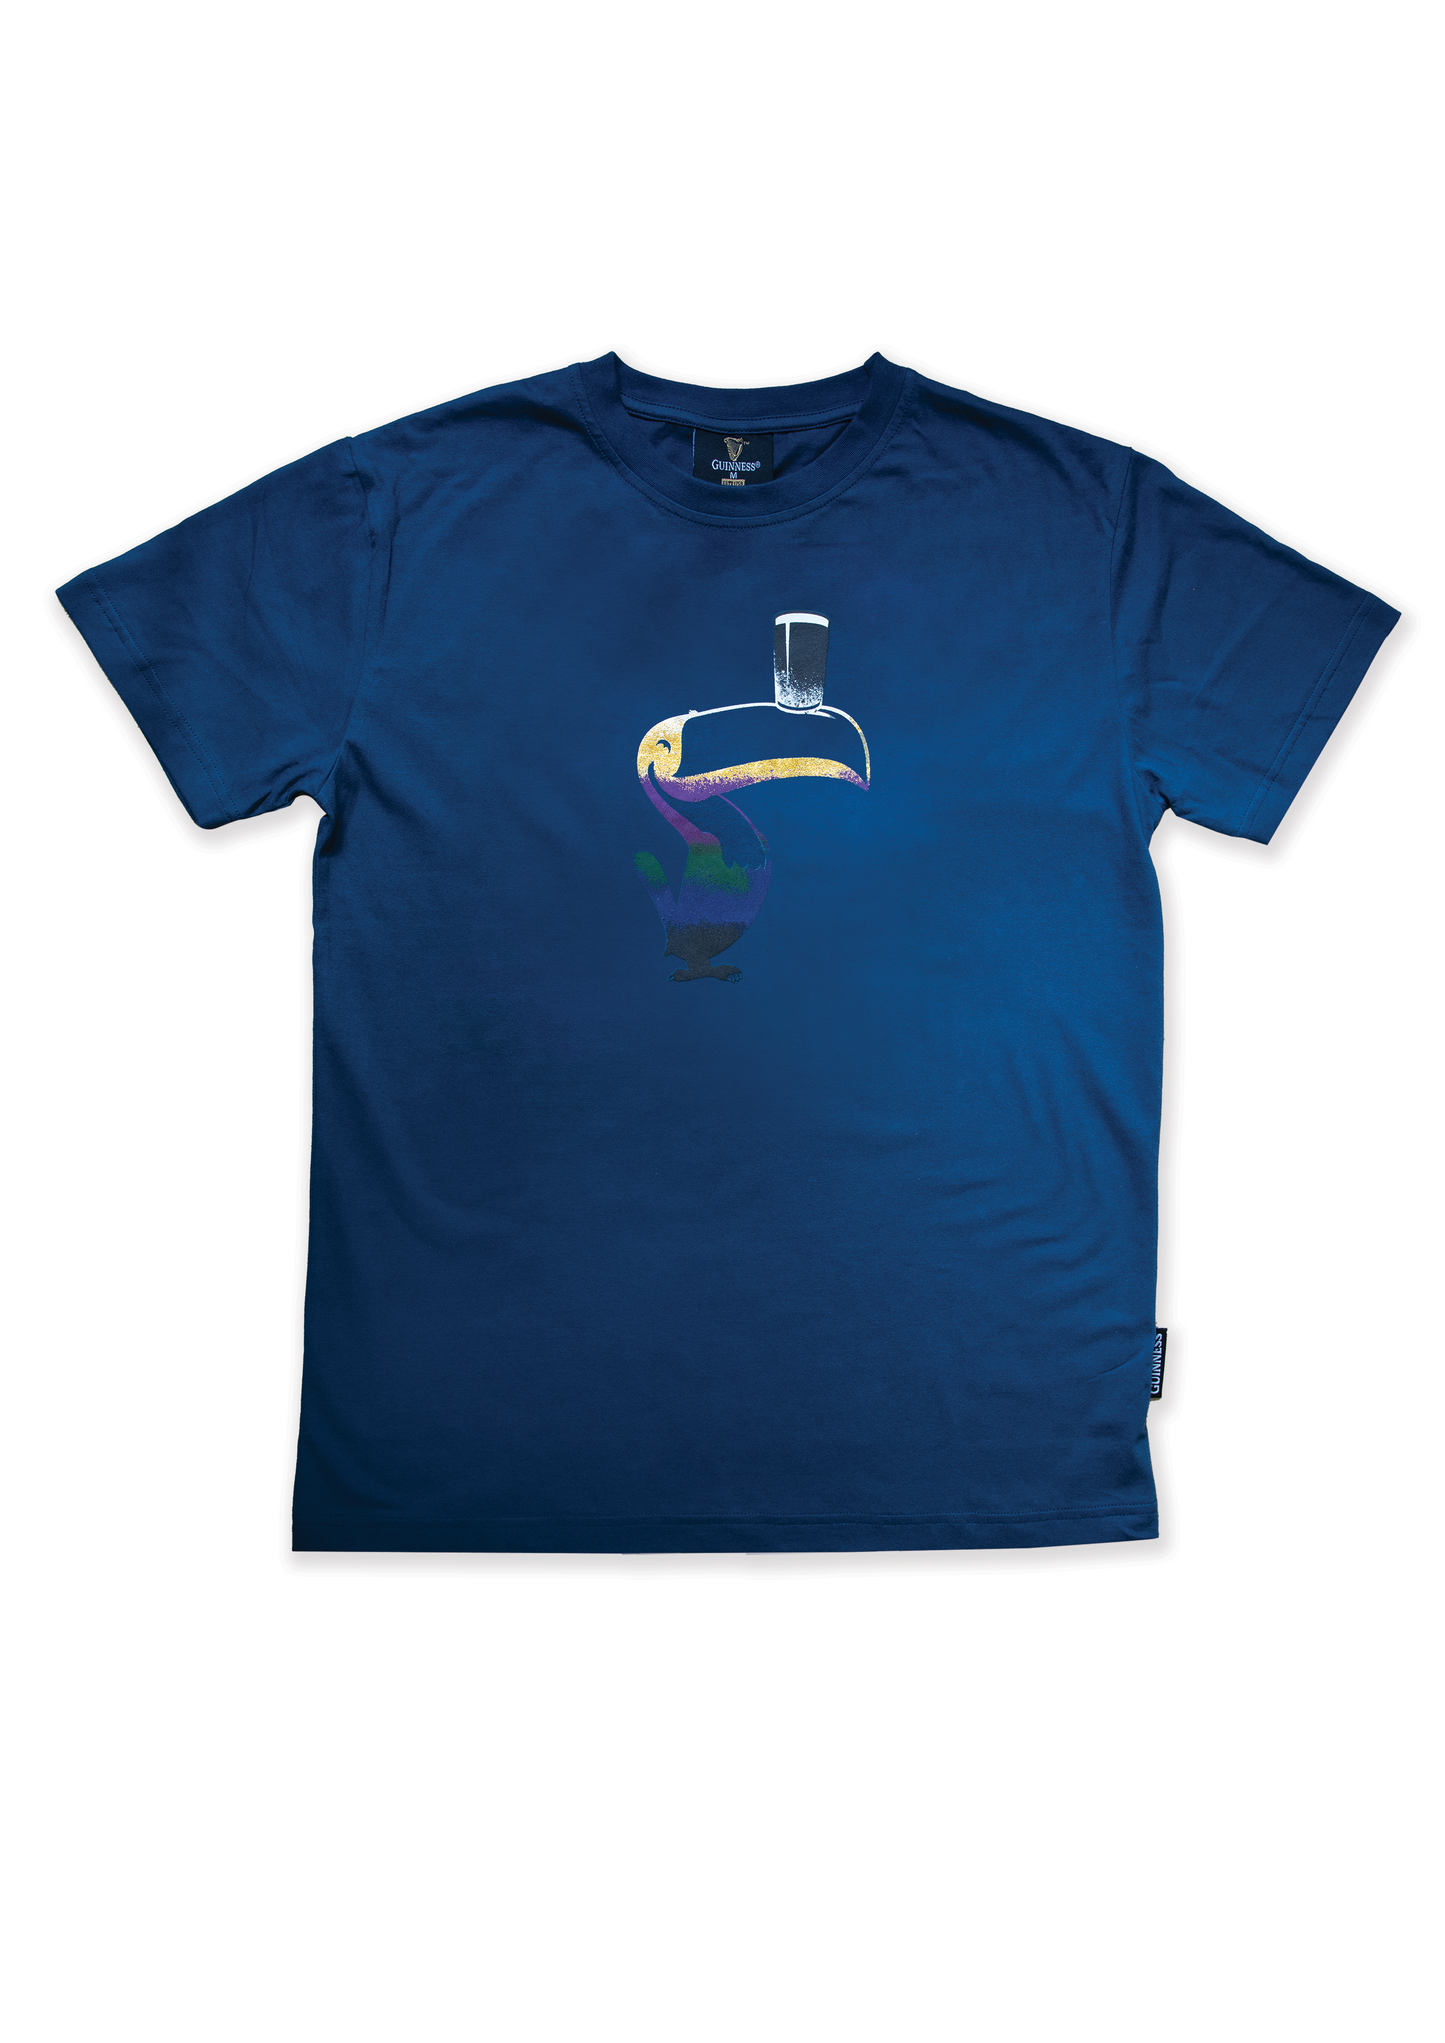 A Guinness Liquid Toucan Tee - Blue with an image of a boat on it.